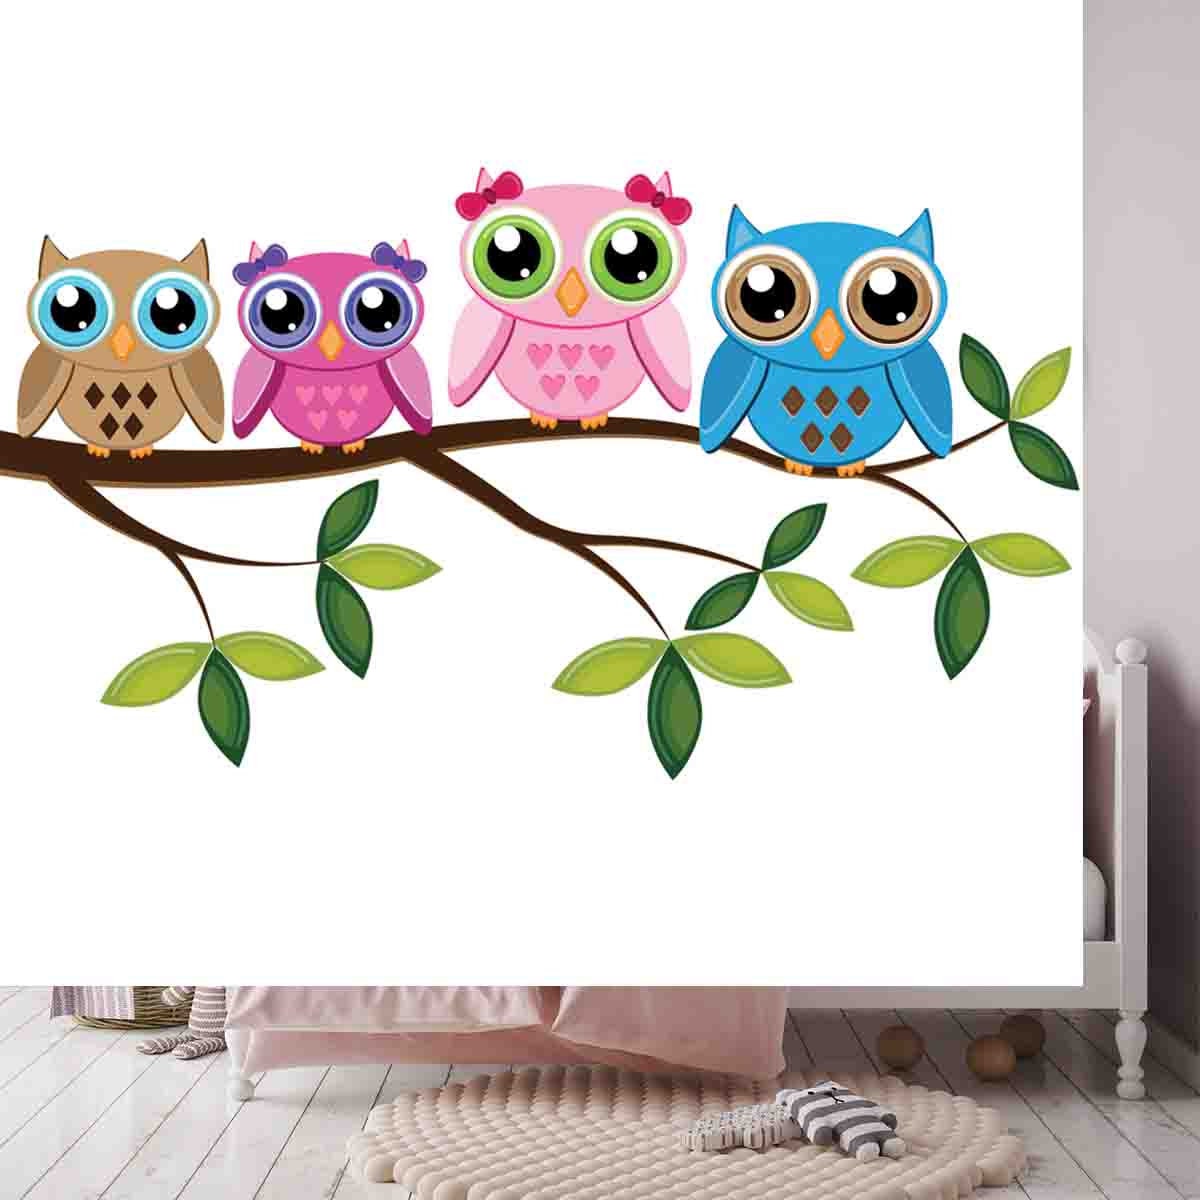 Four Colorful Owls Sitting on the Branch on a White Background Wallpaper Little Girl Bedroom Mural